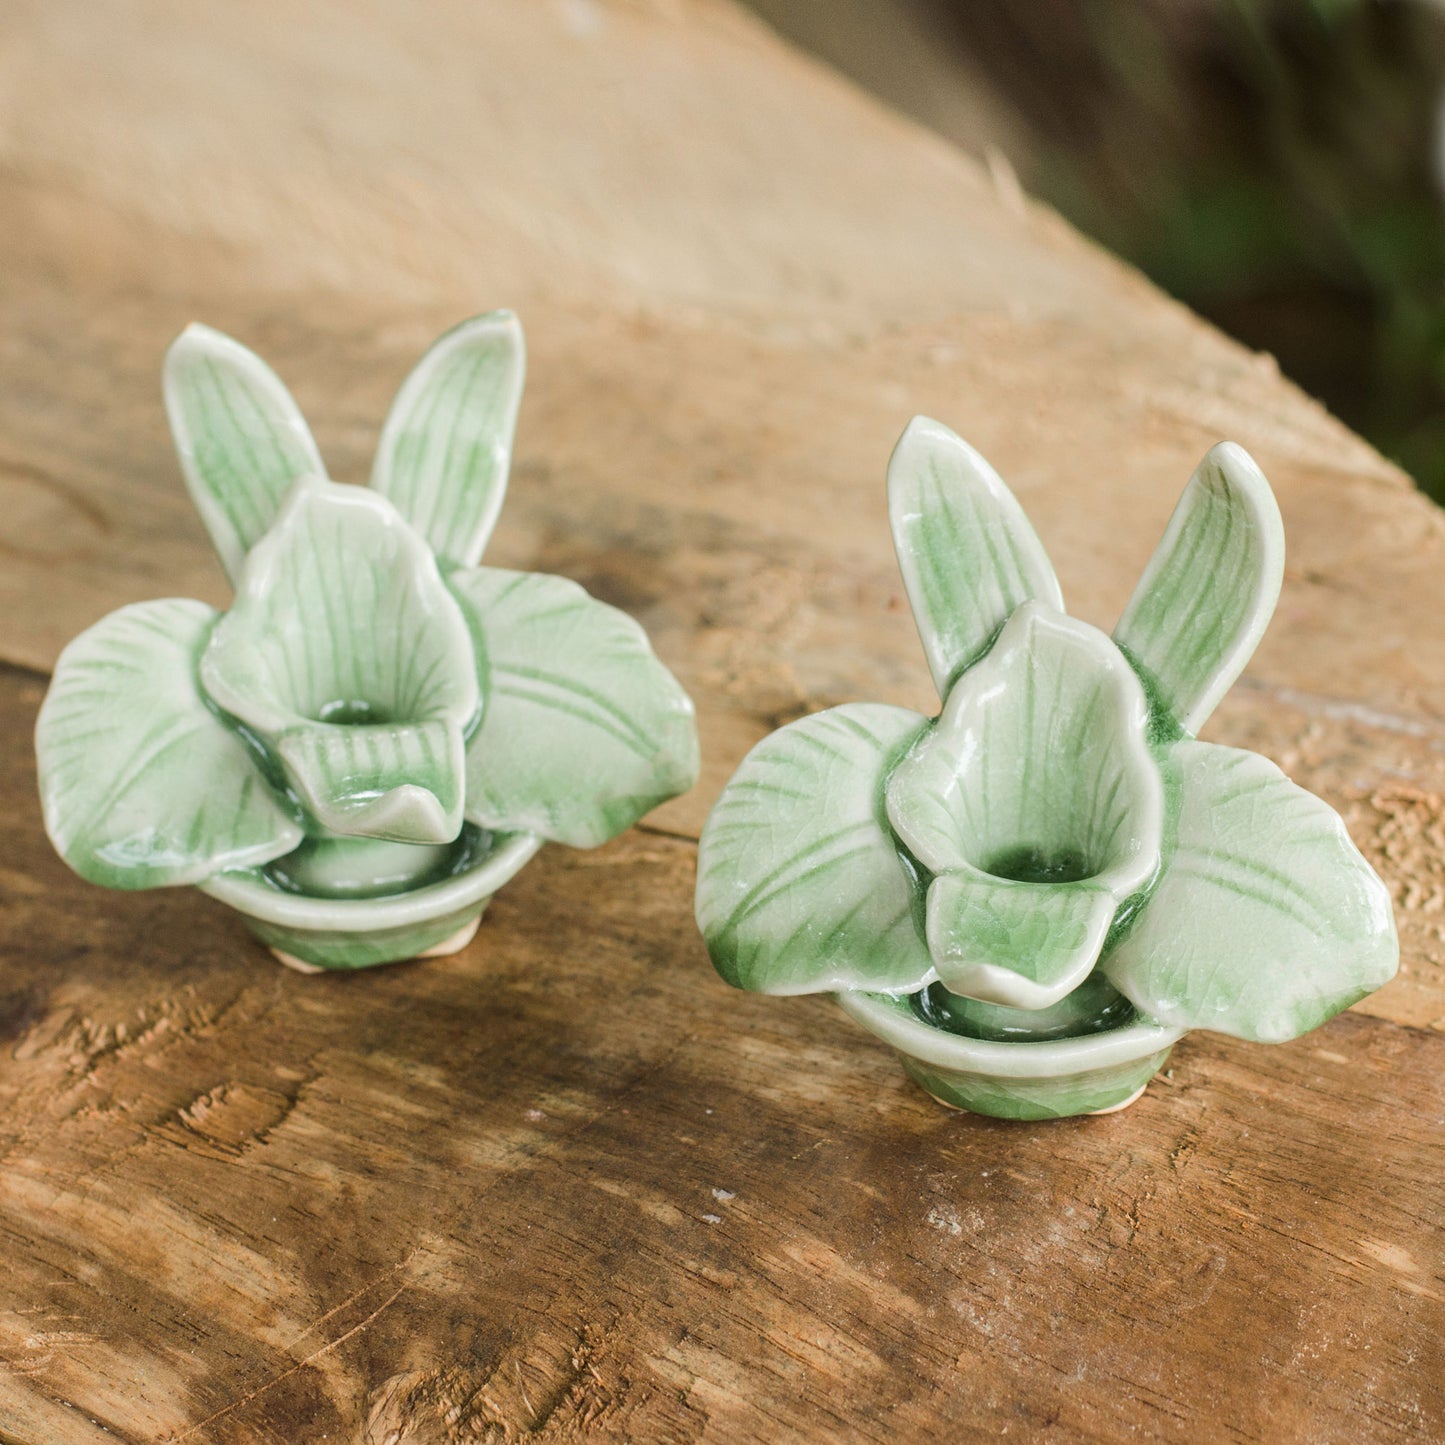 Thai Jade Orchids Green Celadon Ceramic Orchid Shaped Candle Holders (Pair)